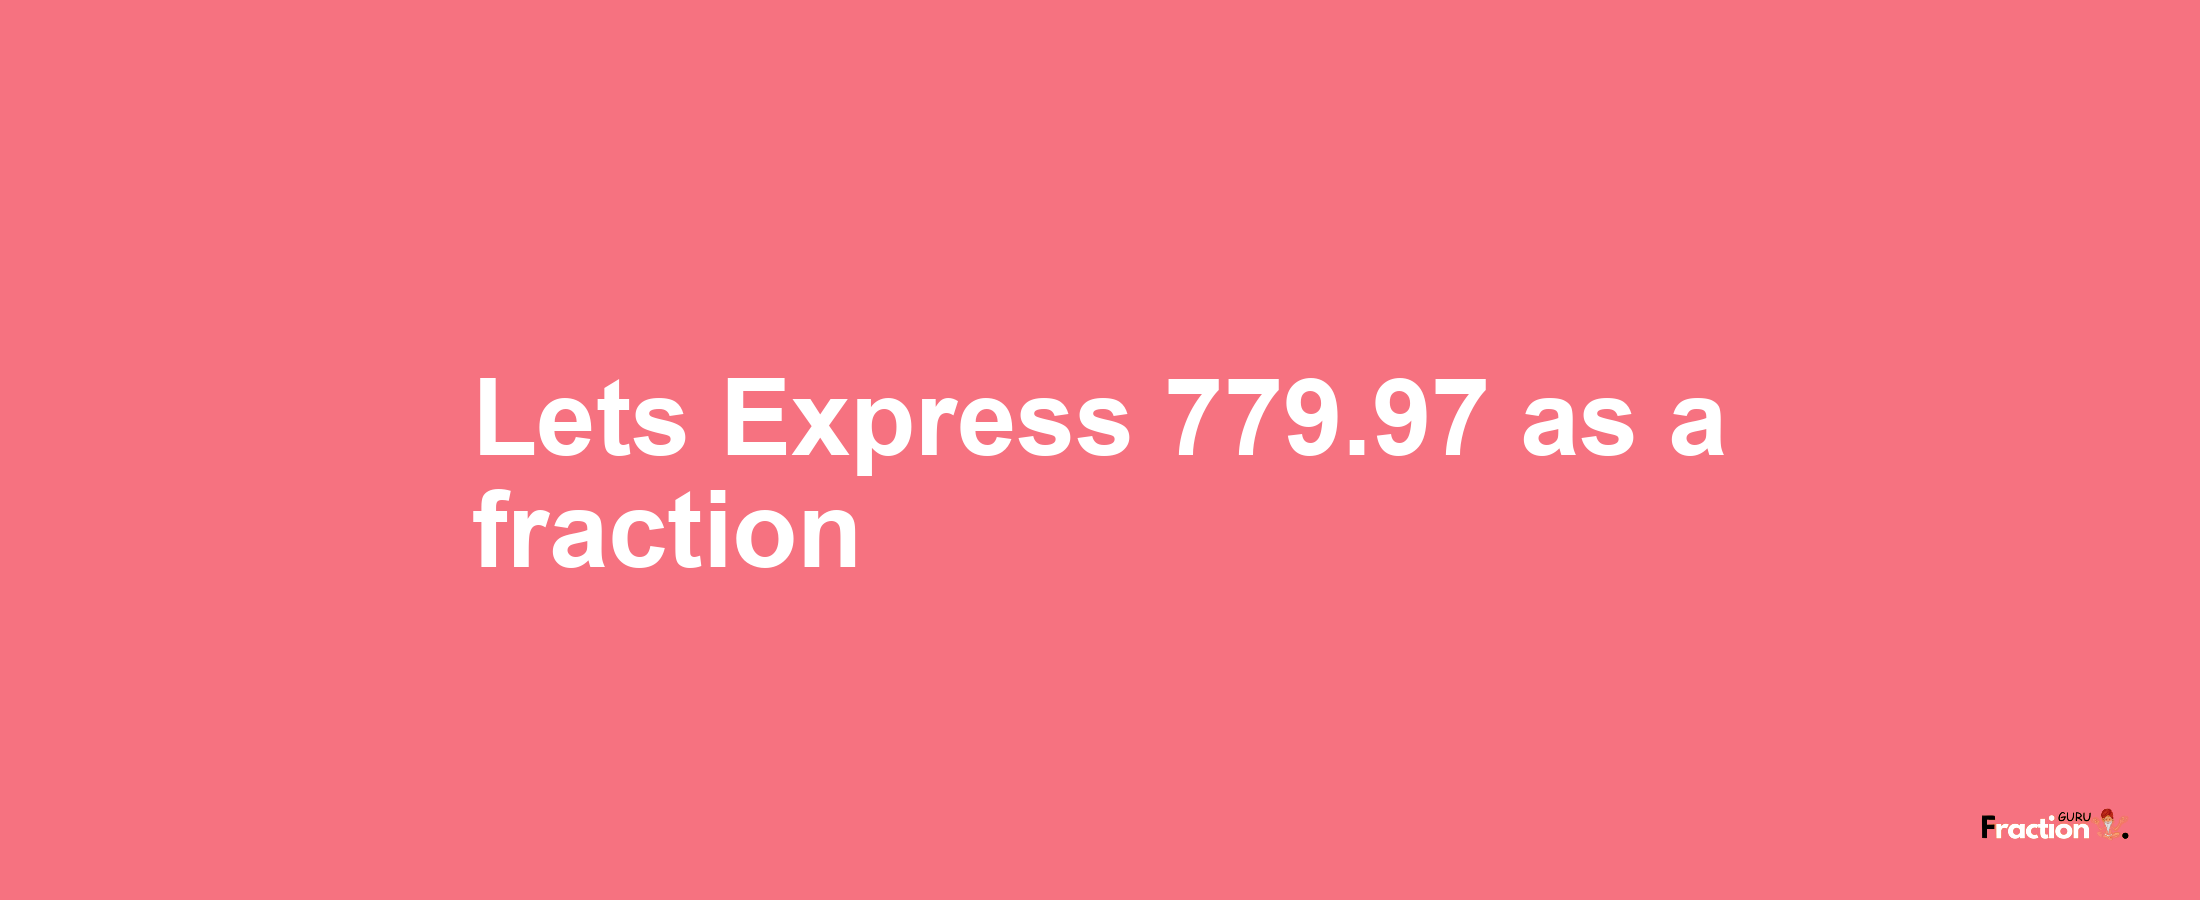 Lets Express 779.97 as afraction